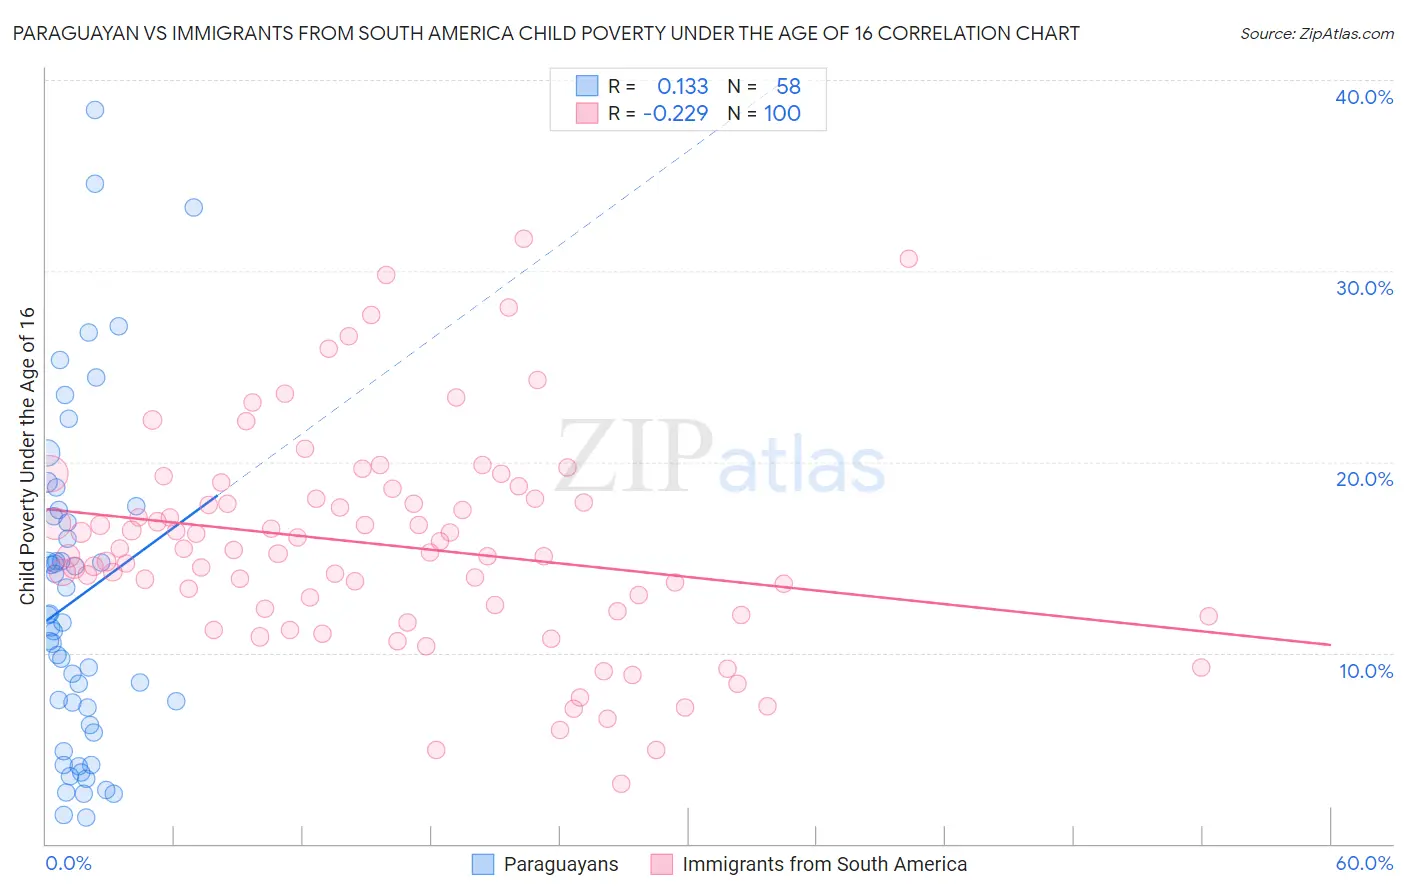 Paraguayan vs Immigrants from South America Child Poverty Under the Age of 16